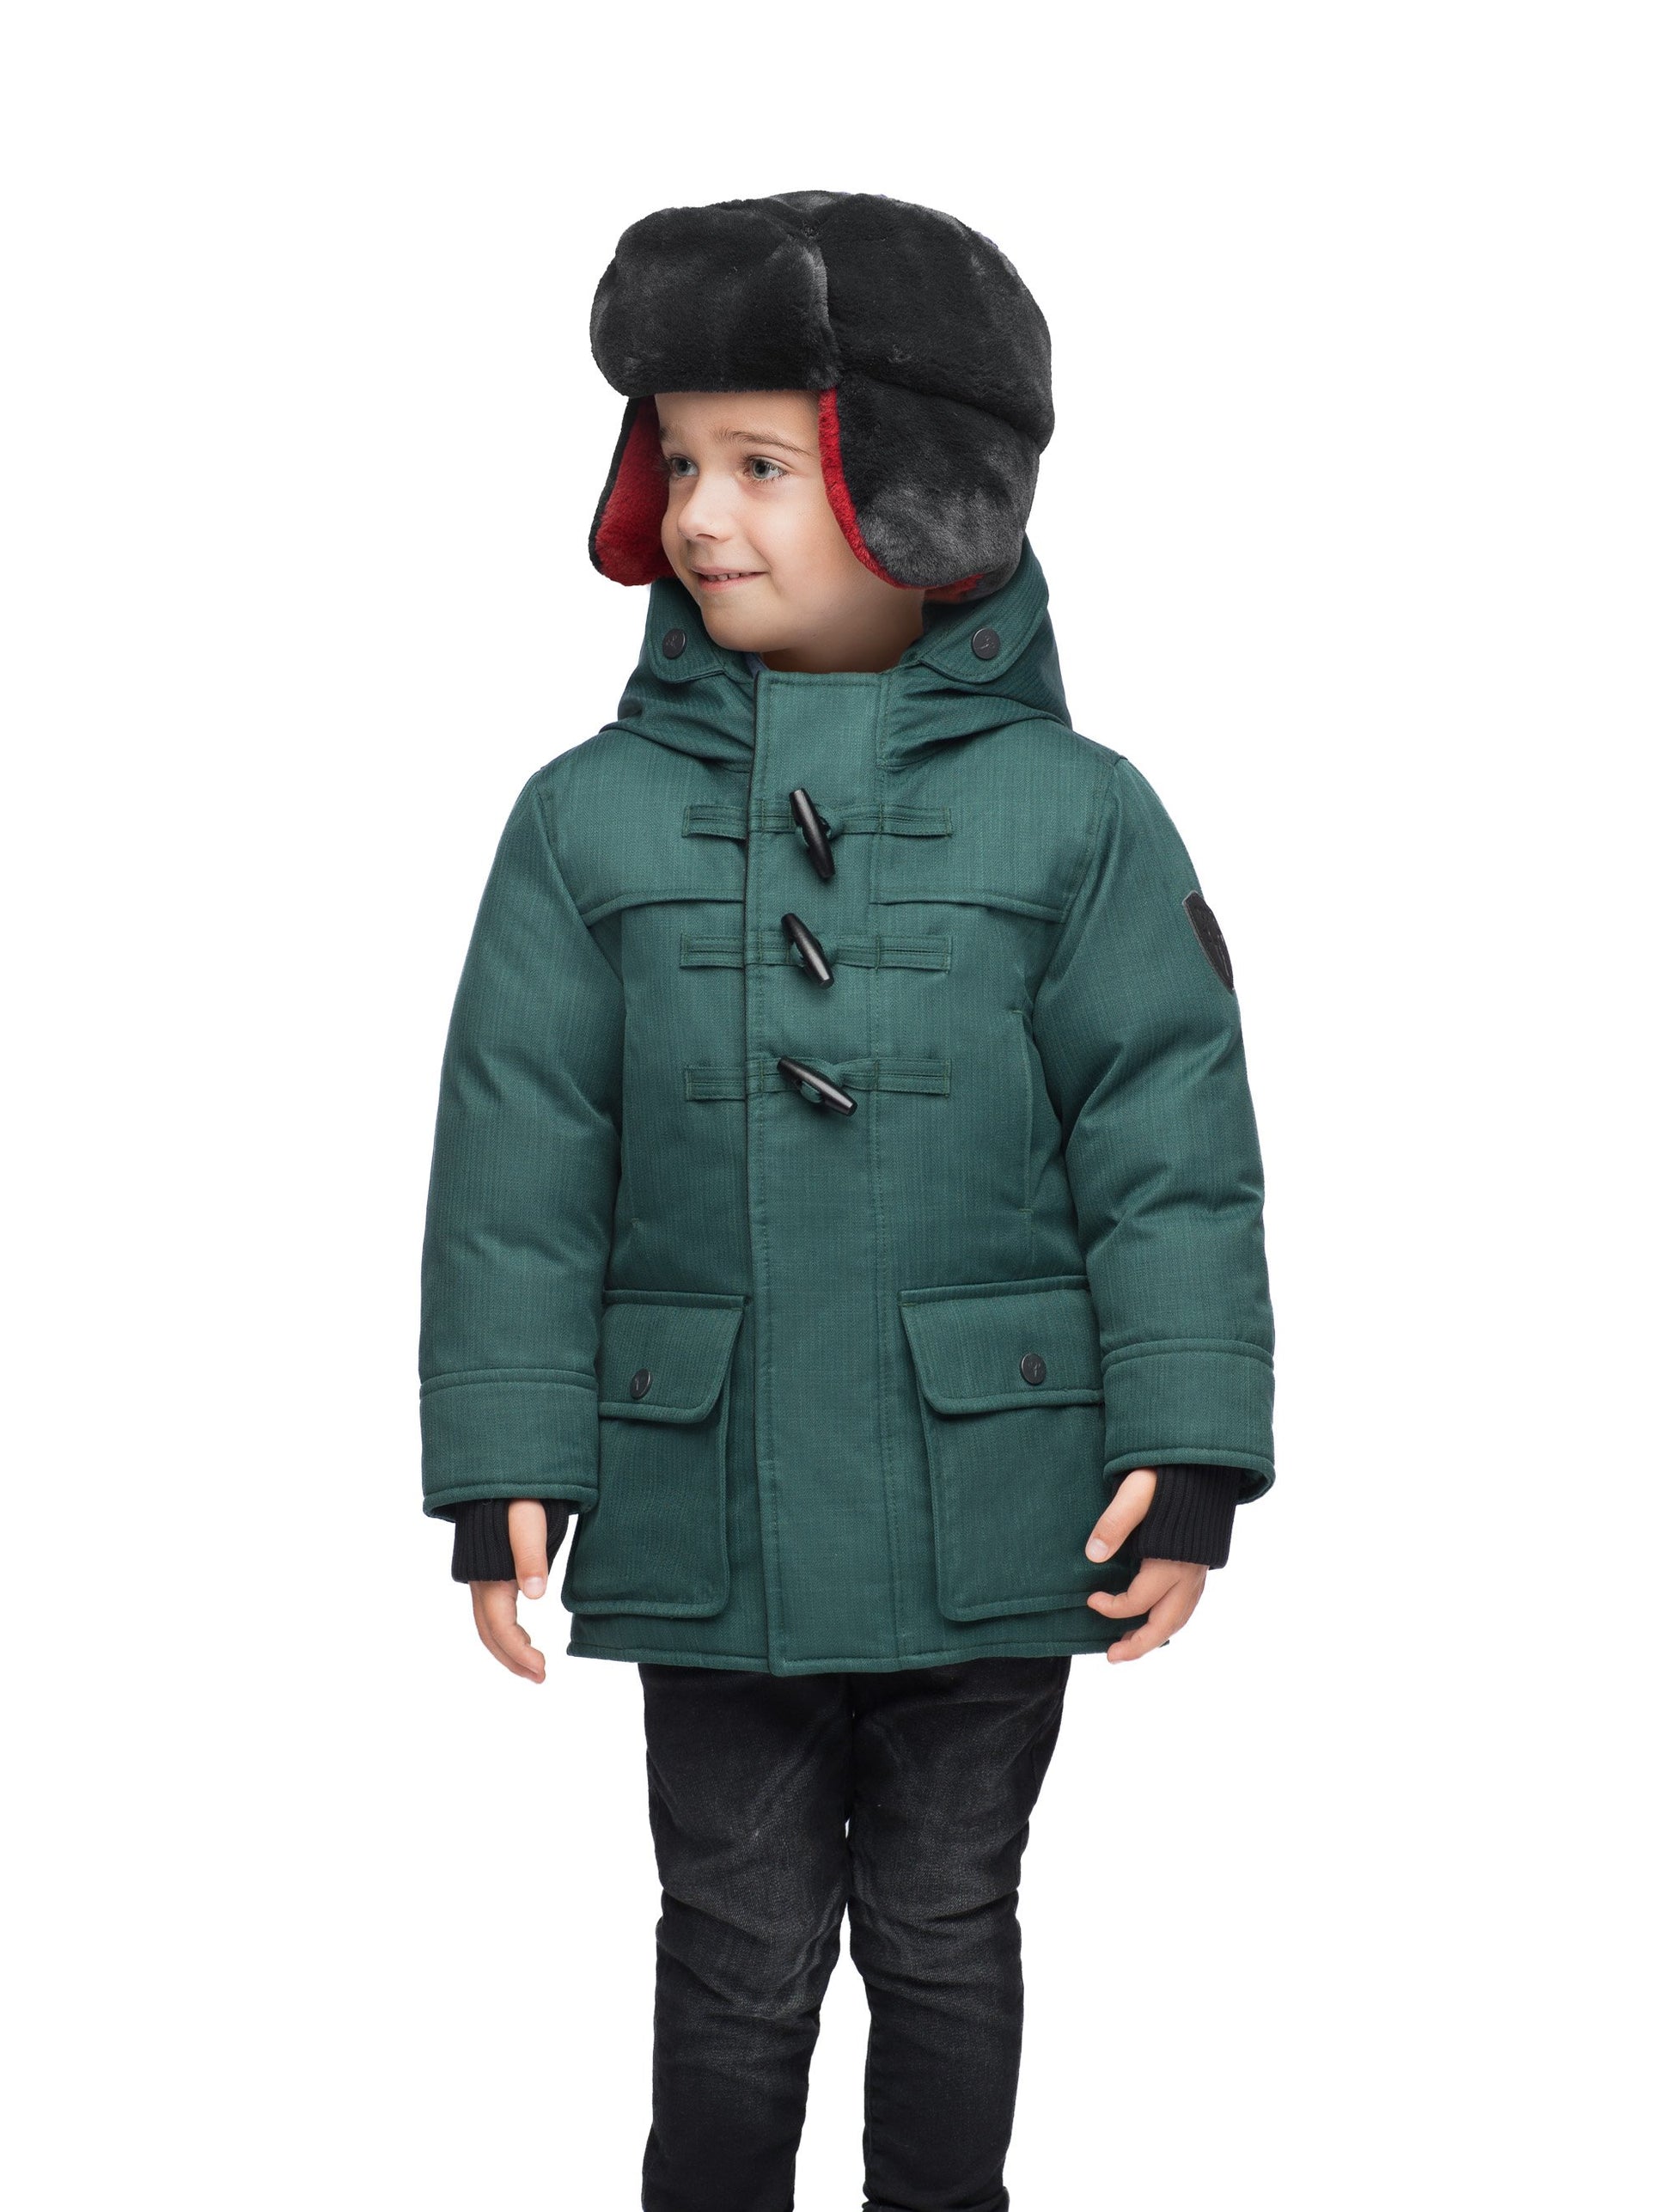 Kid's thigh high down coat with toggle closures in CH Forest